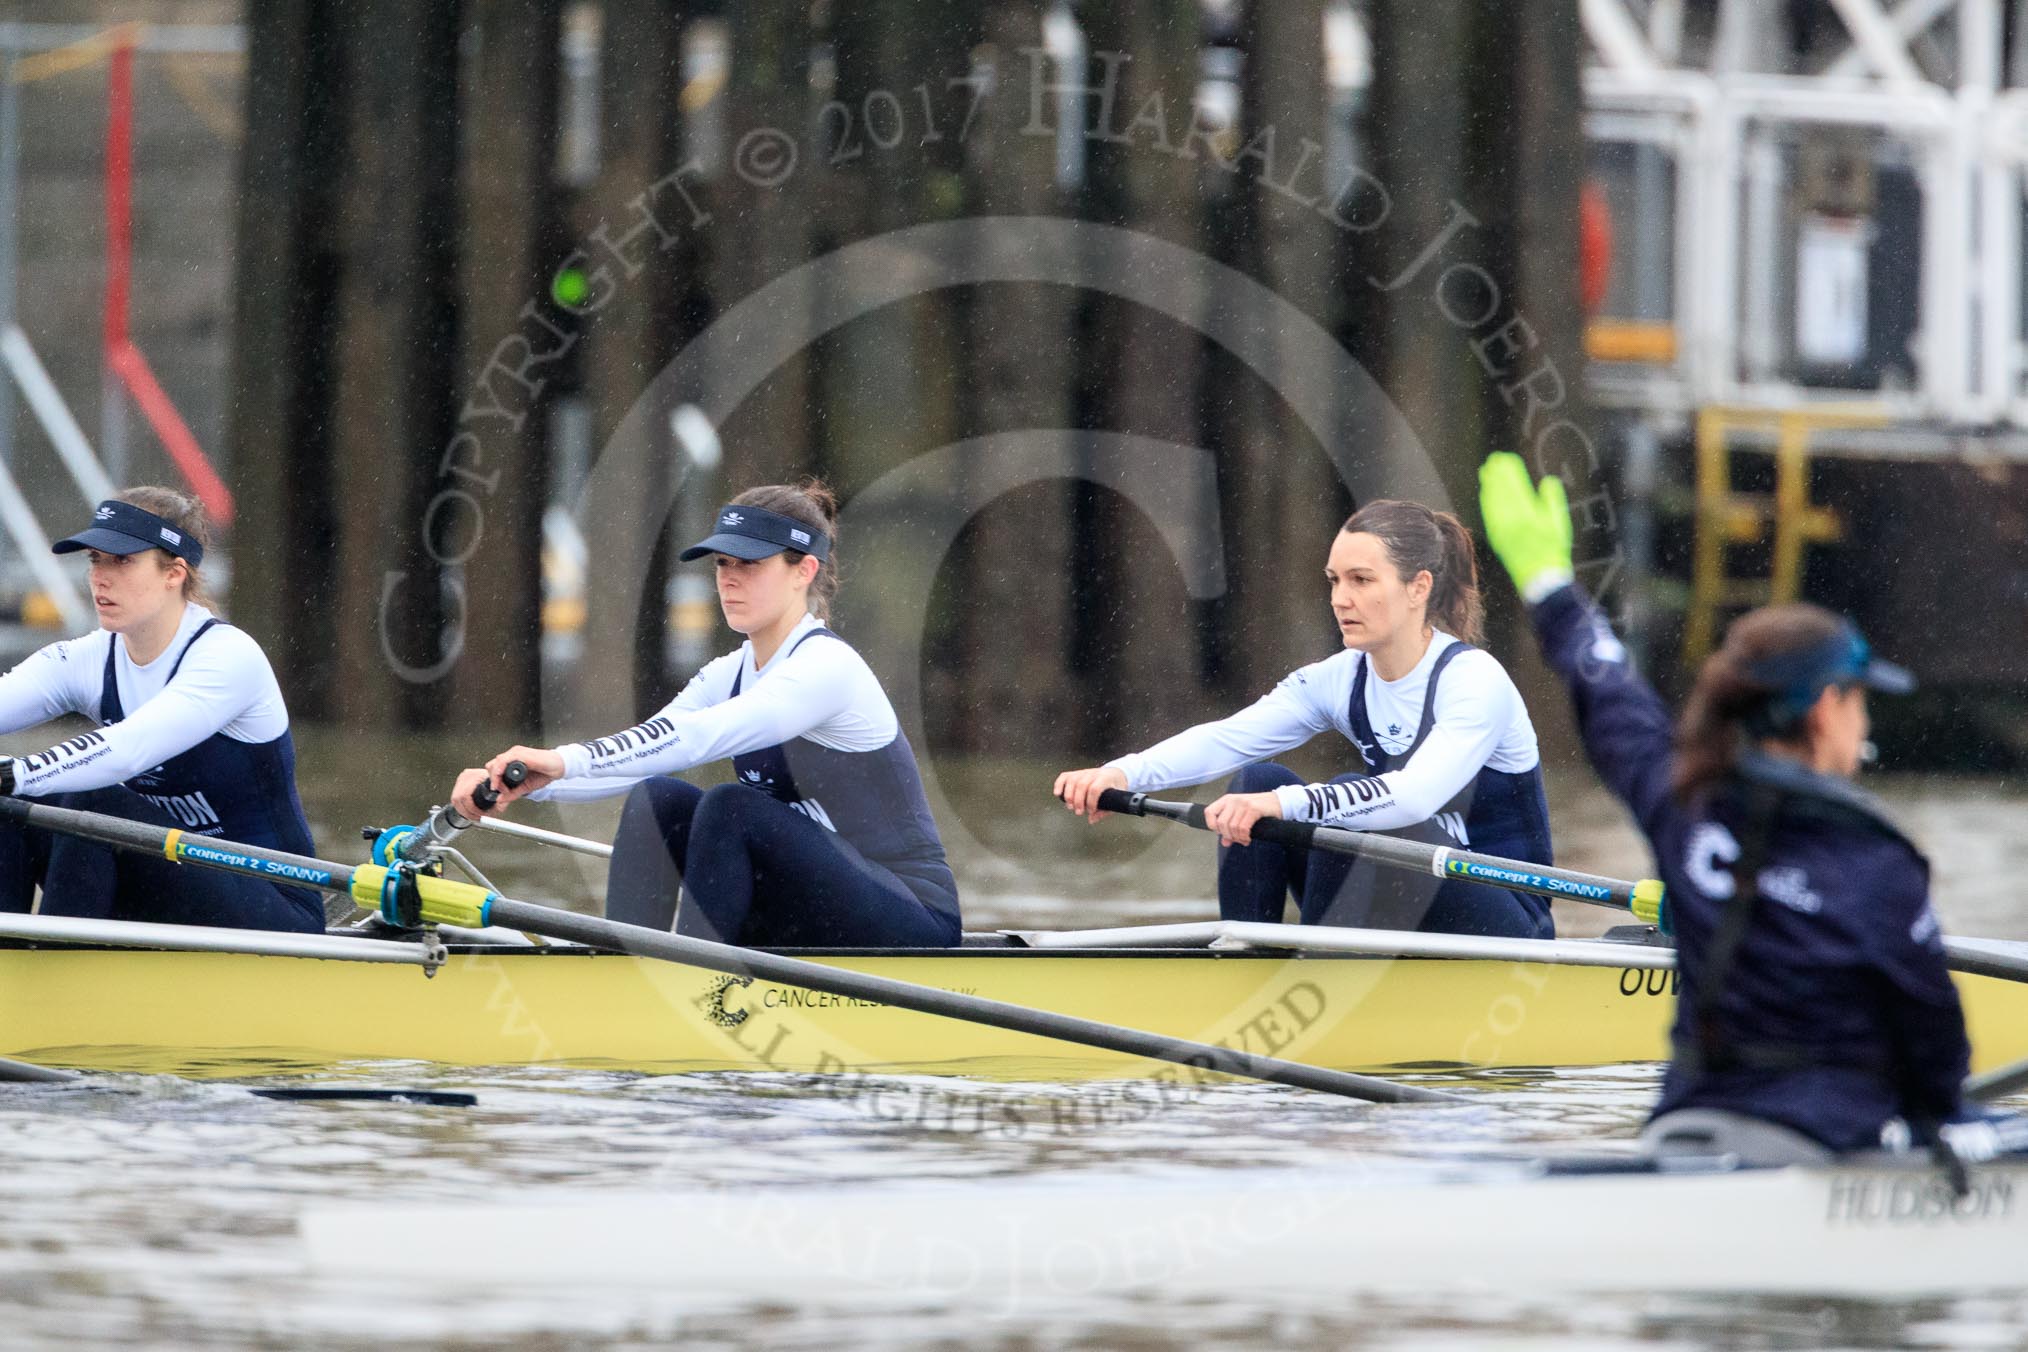 The Boat Race season 2018 - Women's Boat Race Trial Eights (OUWBC, Oxford): "Coursing River" - 3 Stefanie Zekoll, 2 Rachel Anderson, bow Sarah Payne-Riches.
River Thames between Putney Bridge and Mortlake,
London SW15,

United Kingdom,
on 21 January 2018 at 14:27, image #50